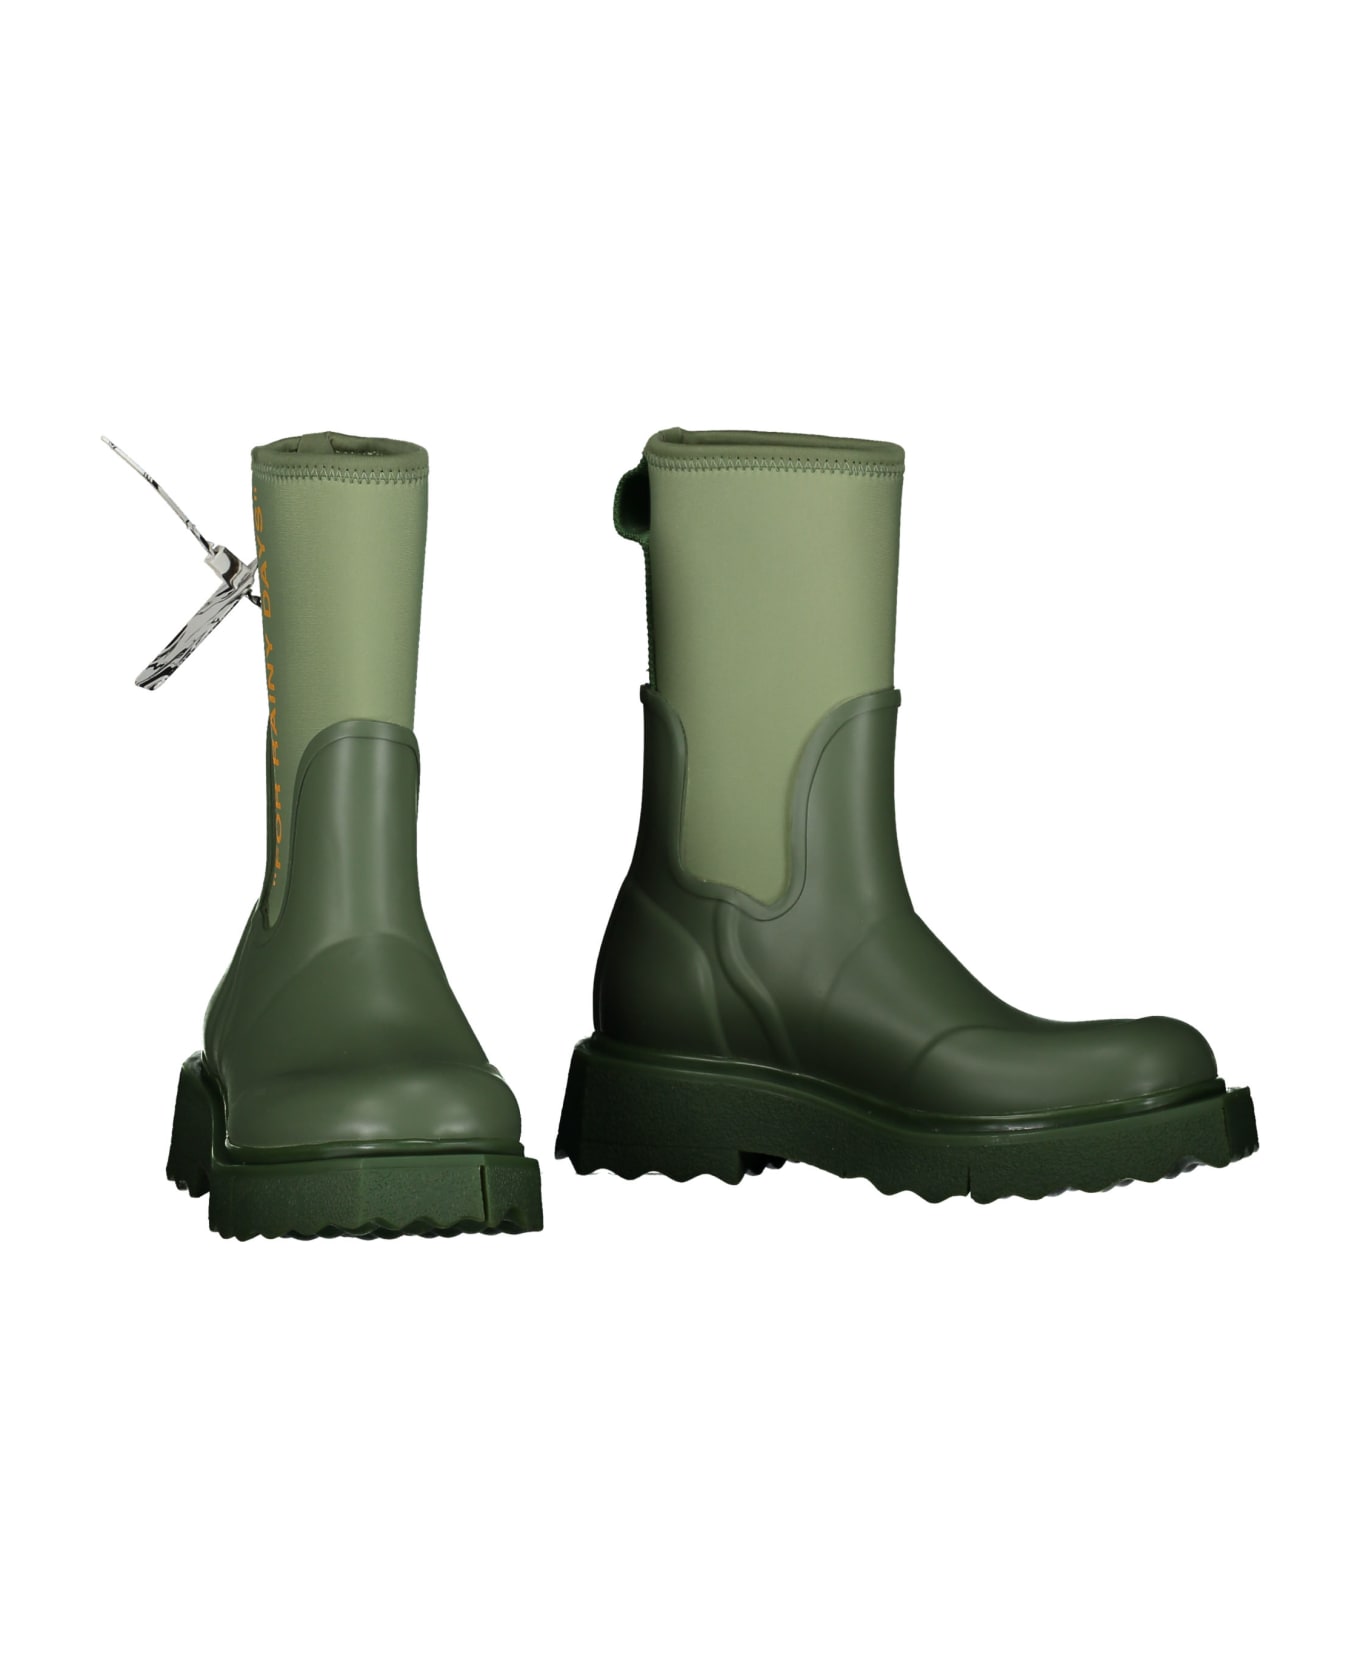 Off-White Rubber And Neoprene Rain Boots - green